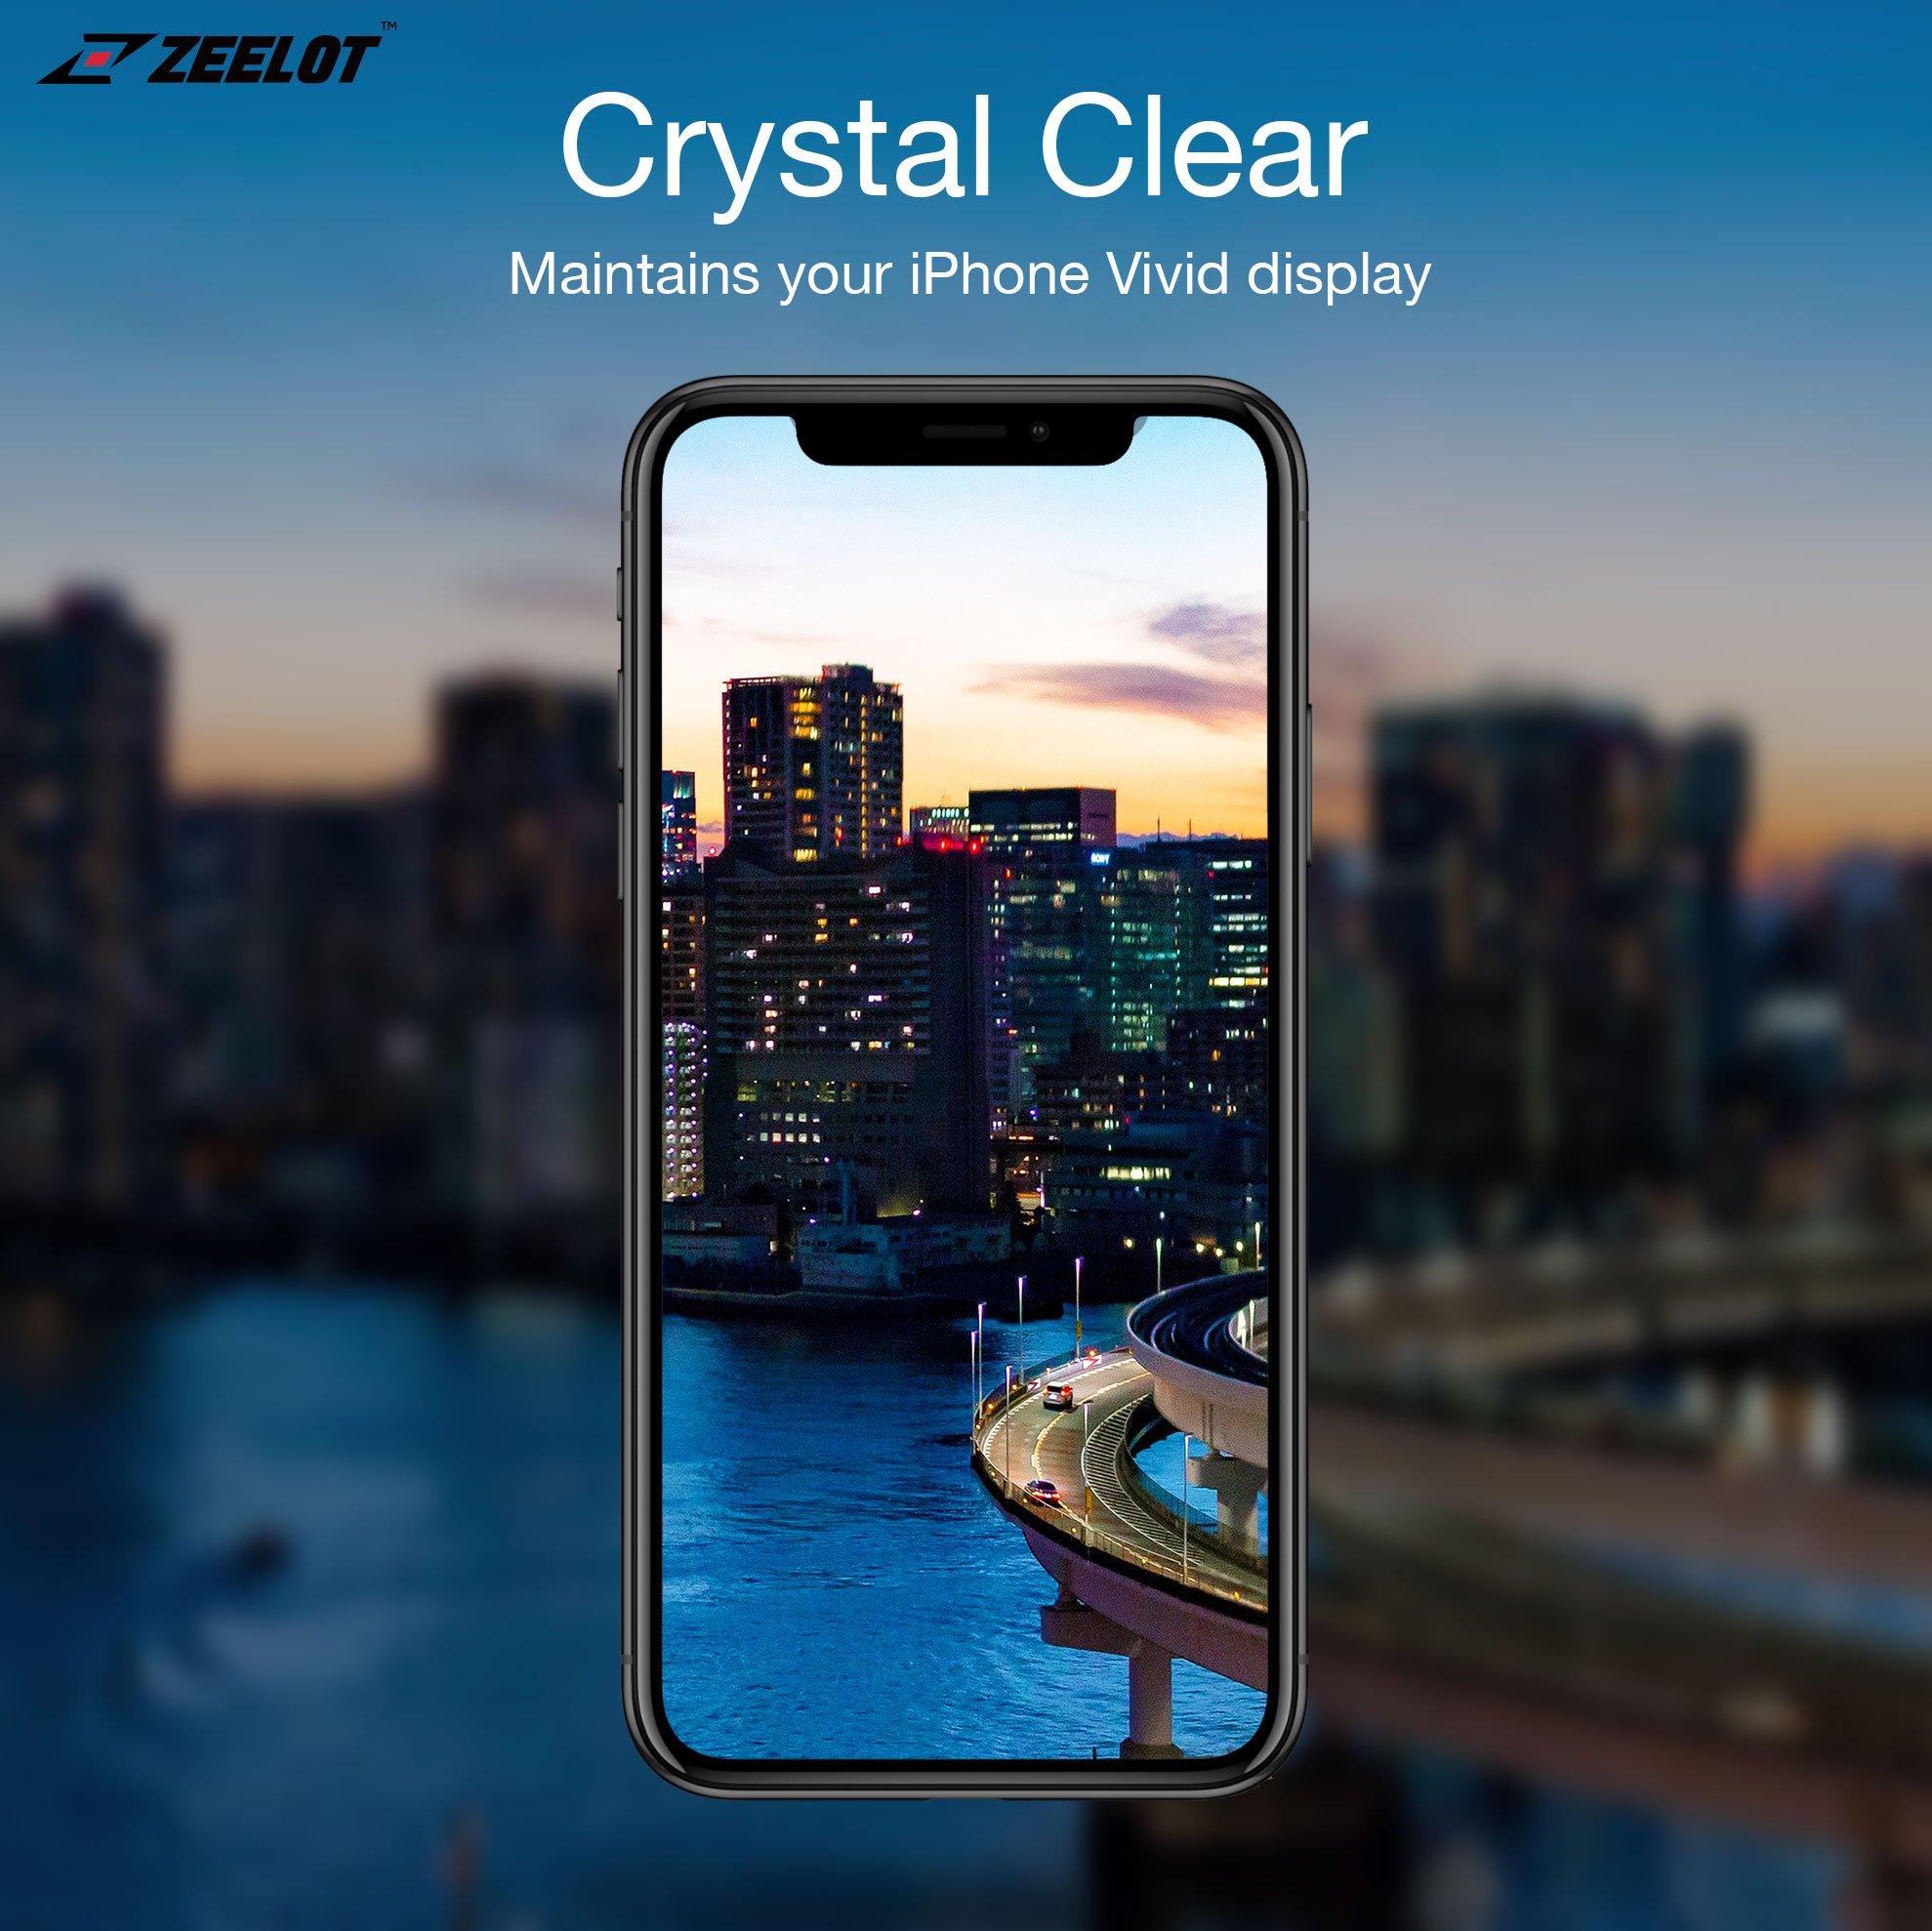 ZEELOT PureGlass 2.5D Clear Tempered Glass Screen Protector for iPhone 8/7 Plus 5.5"(2017/2016), Black Tempered Glass Zeelot 